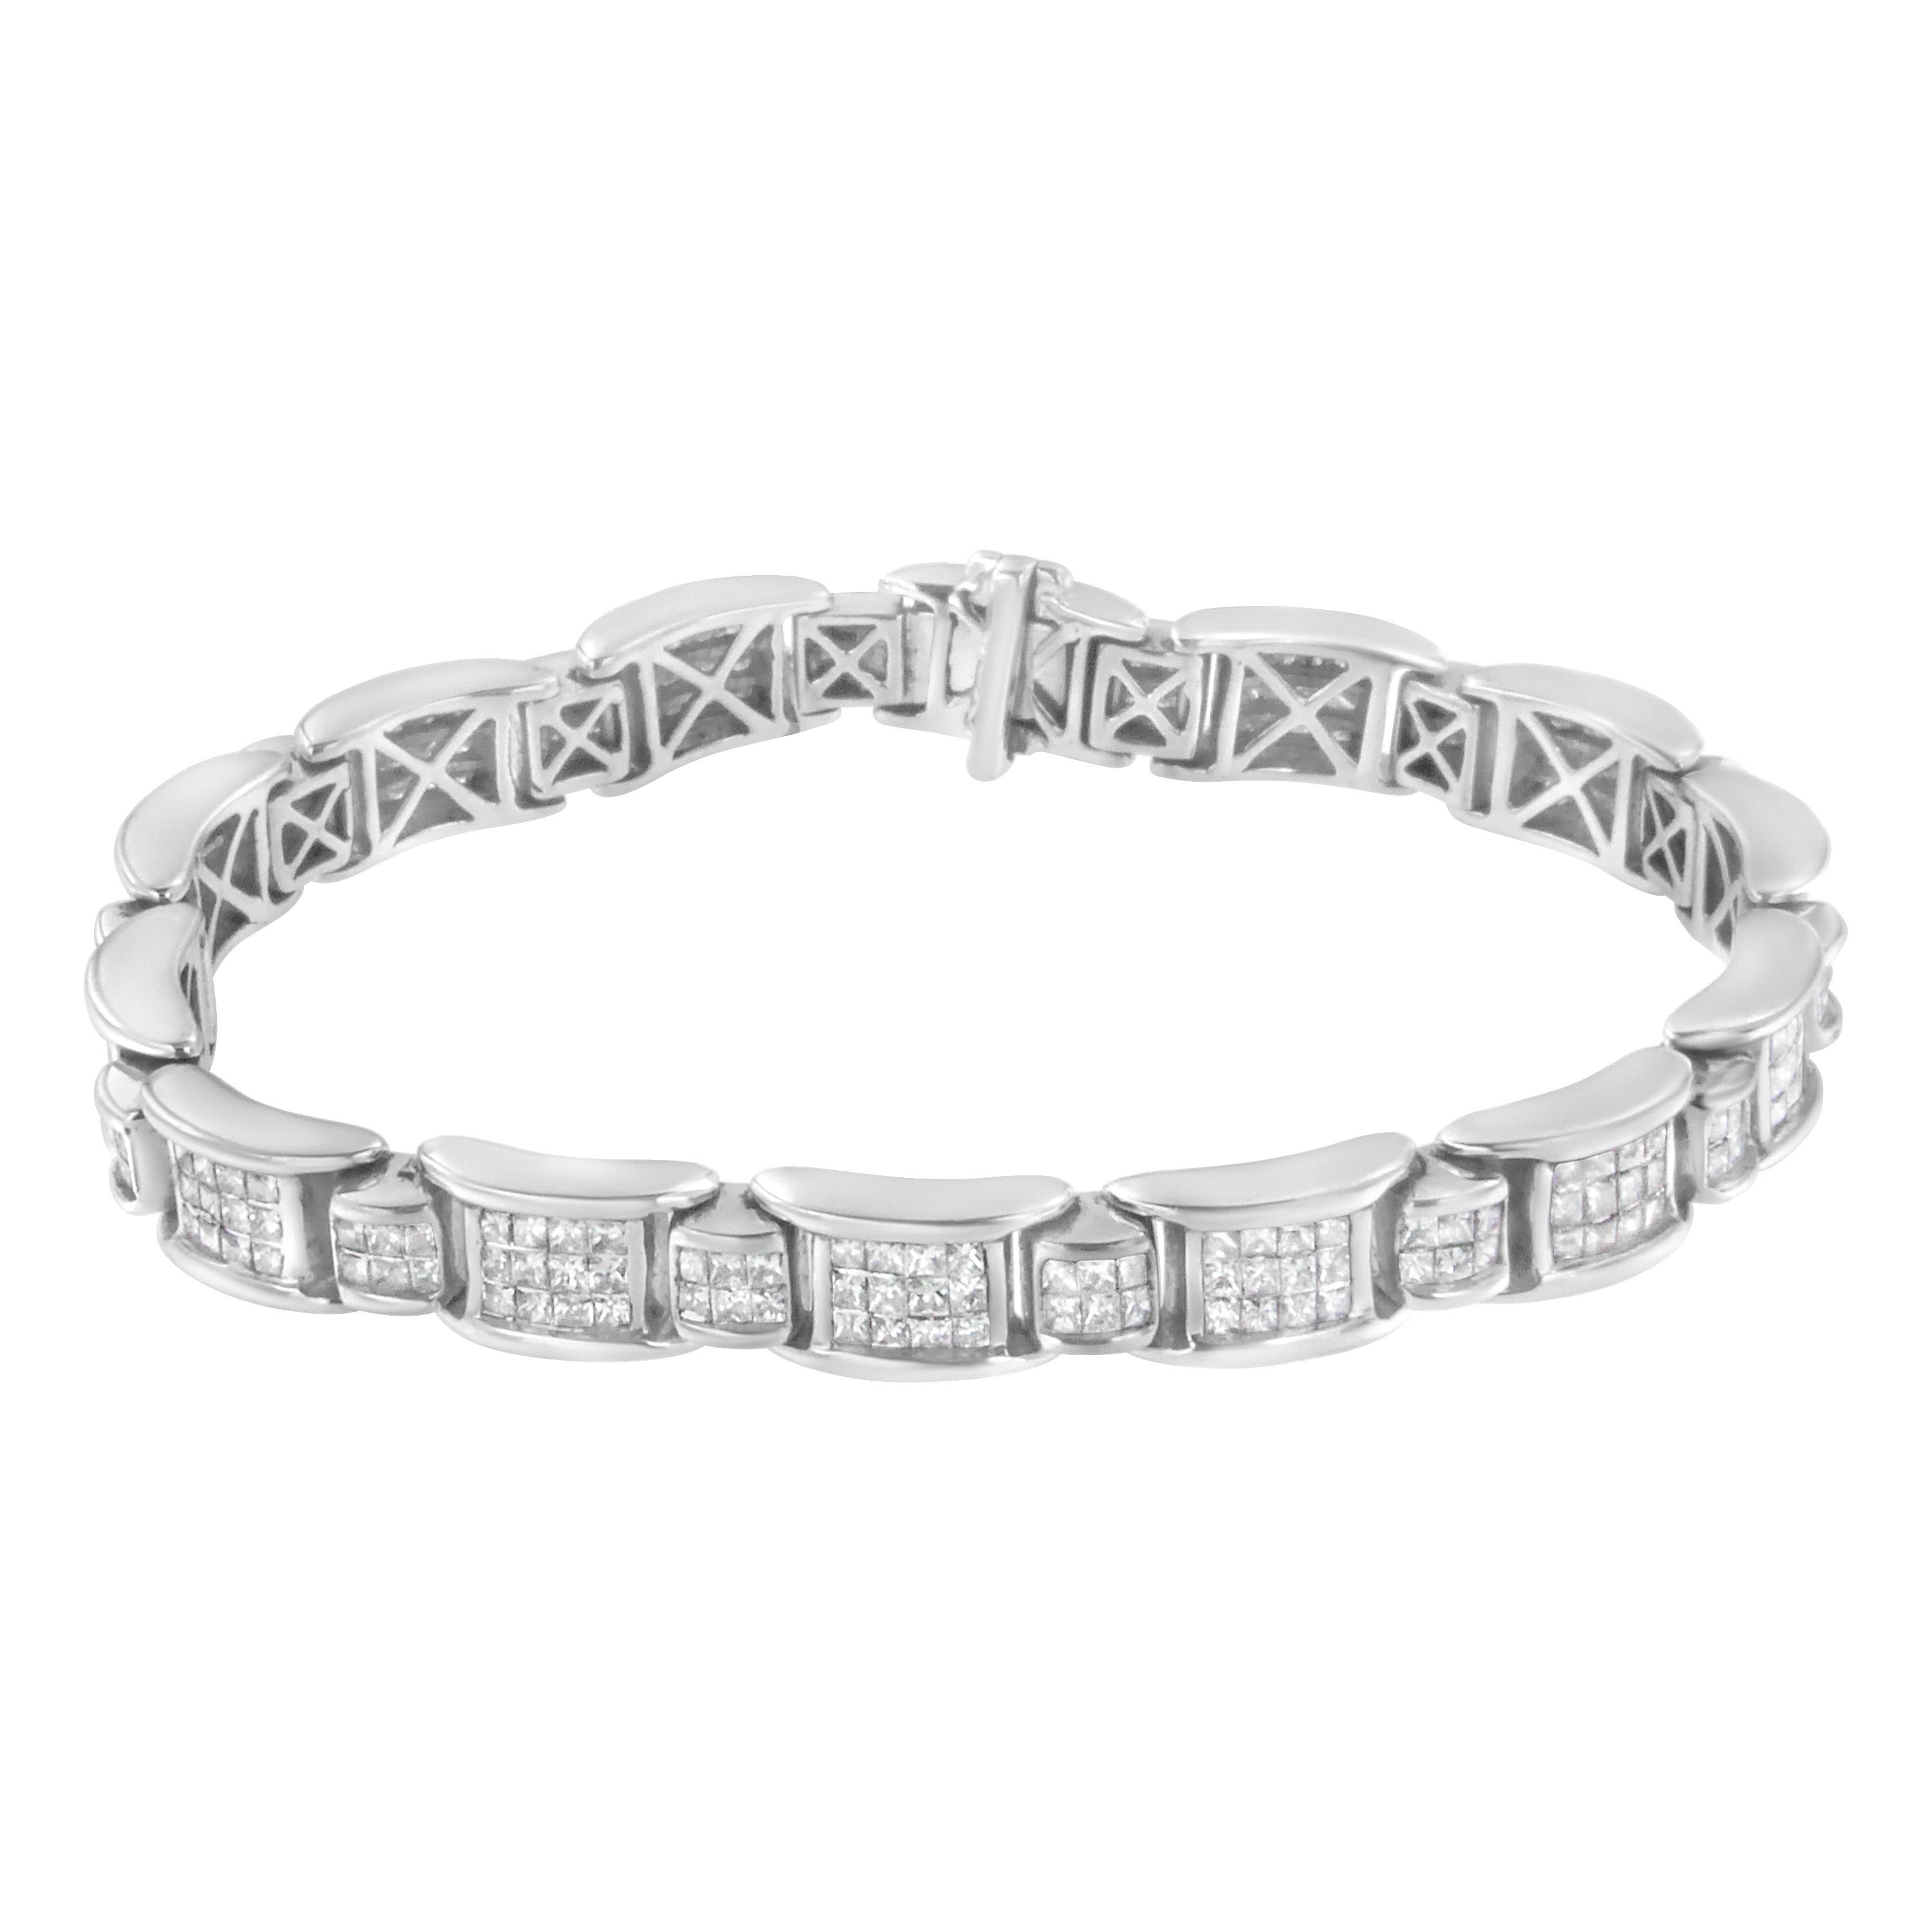 This geometric pattern link bracelet is a timeless piece. Small white gold bands inlaid with six princess cut diamonds link with larger bands inlaid with an additional twelve princess cut diamonds. 5 carat TDW in diamonds shine in this design. A box